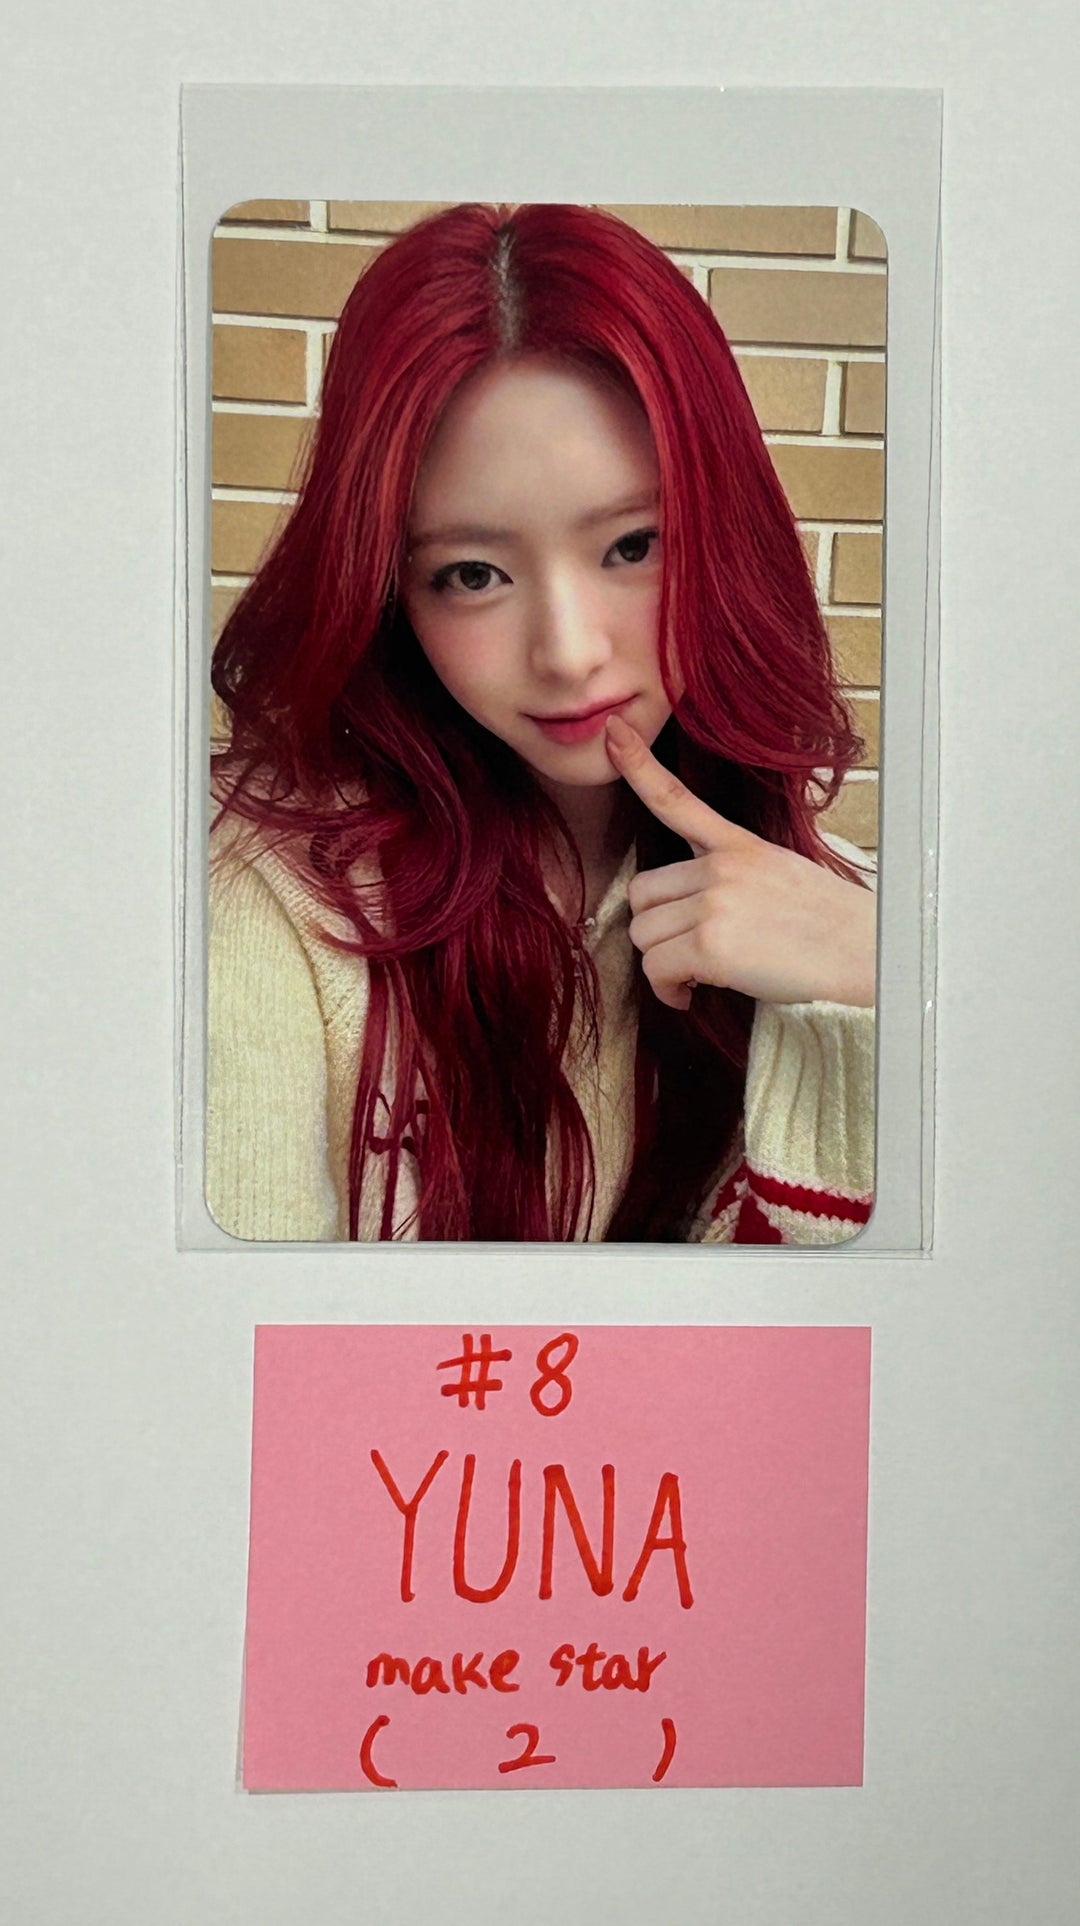 ITZY "BORN TO BE" - Makestar Event Photocard [24.3.7]